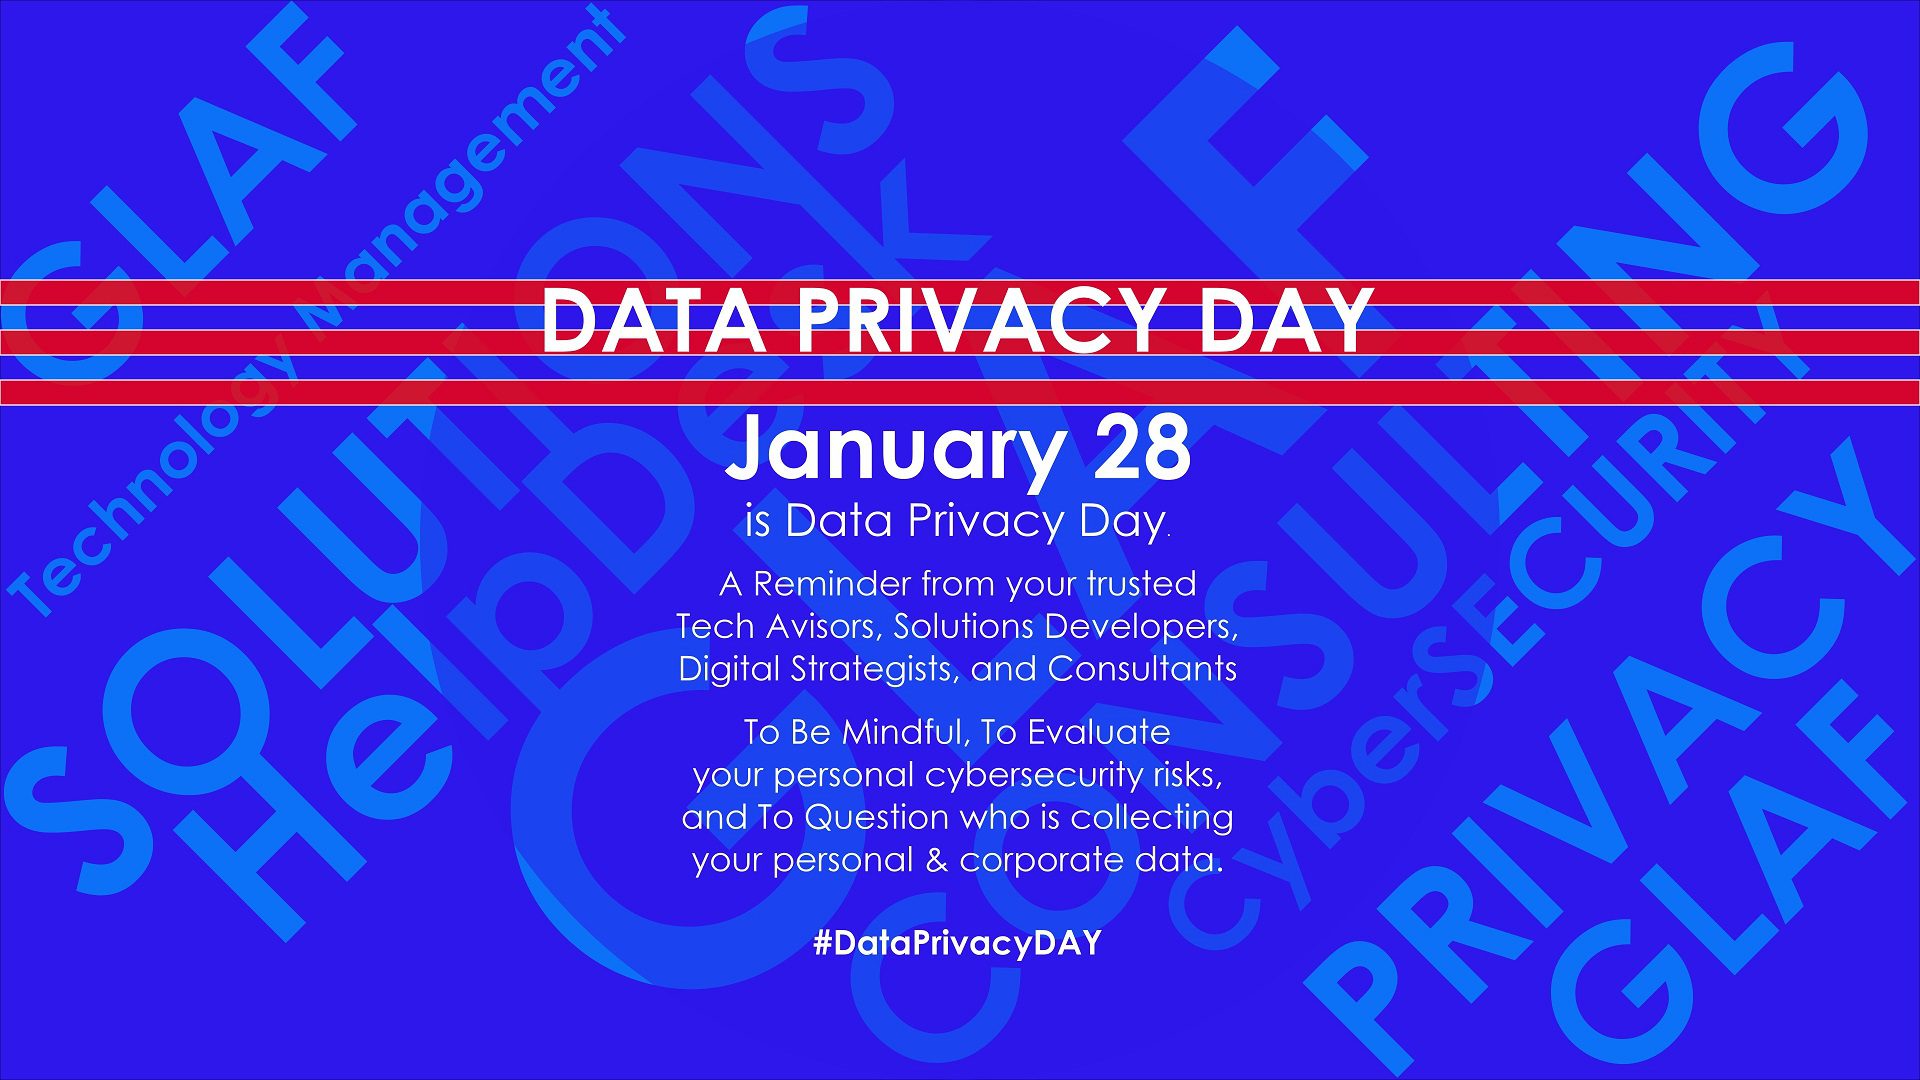 Data Privacy Day - January 28